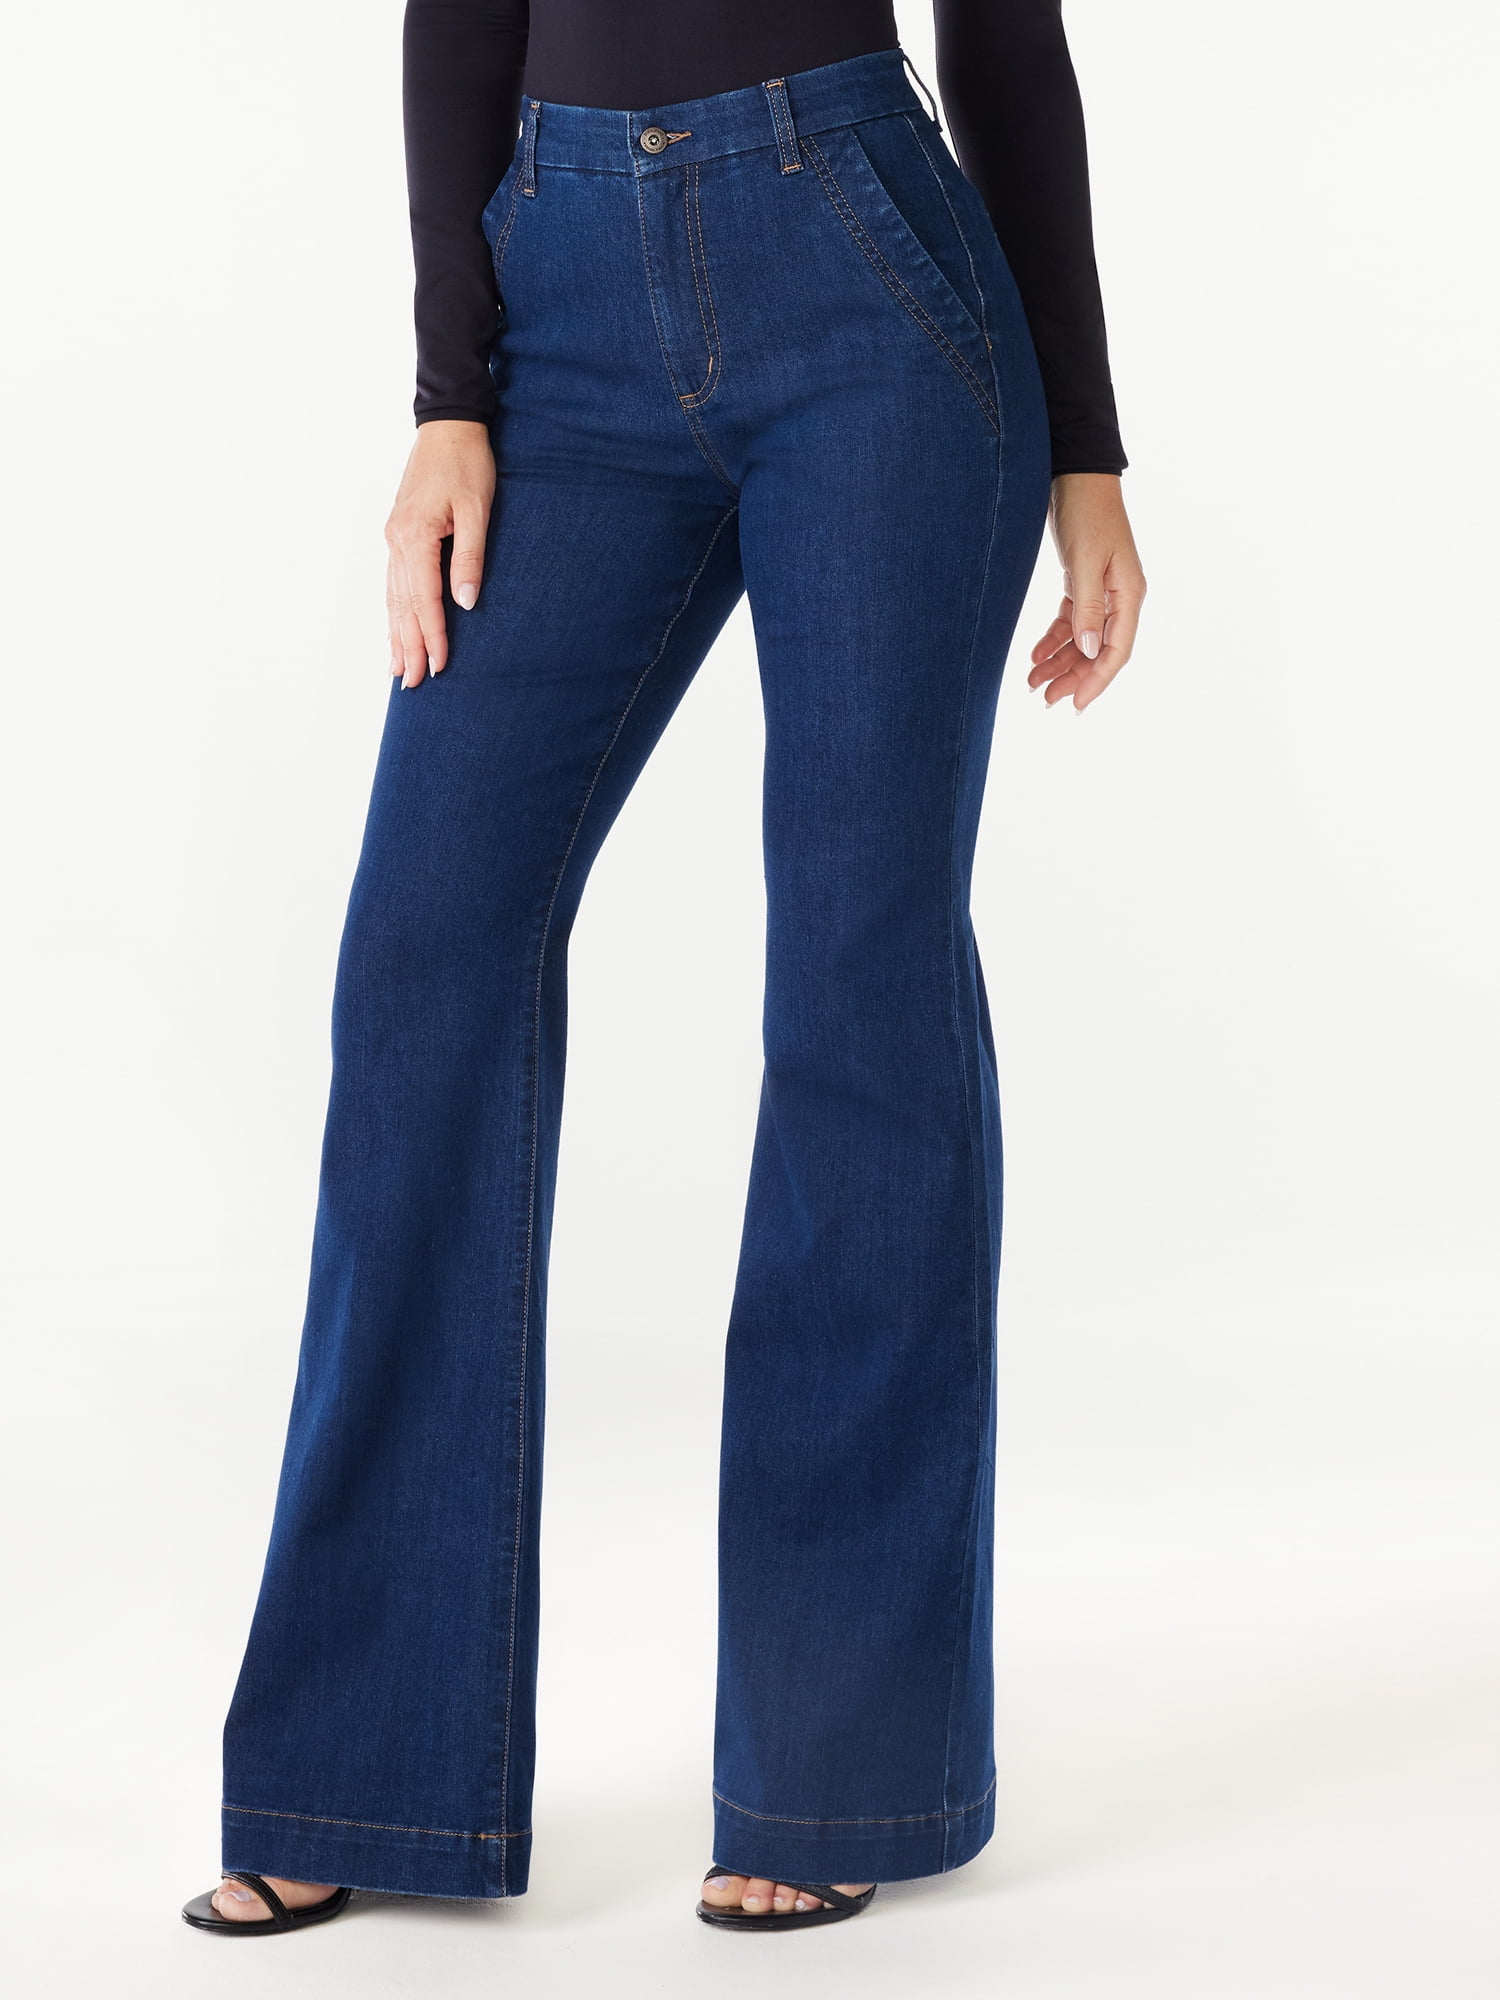 Sofia Jeans Women's Flare Trouser High-Rise Jeans, 30.5 inseam 